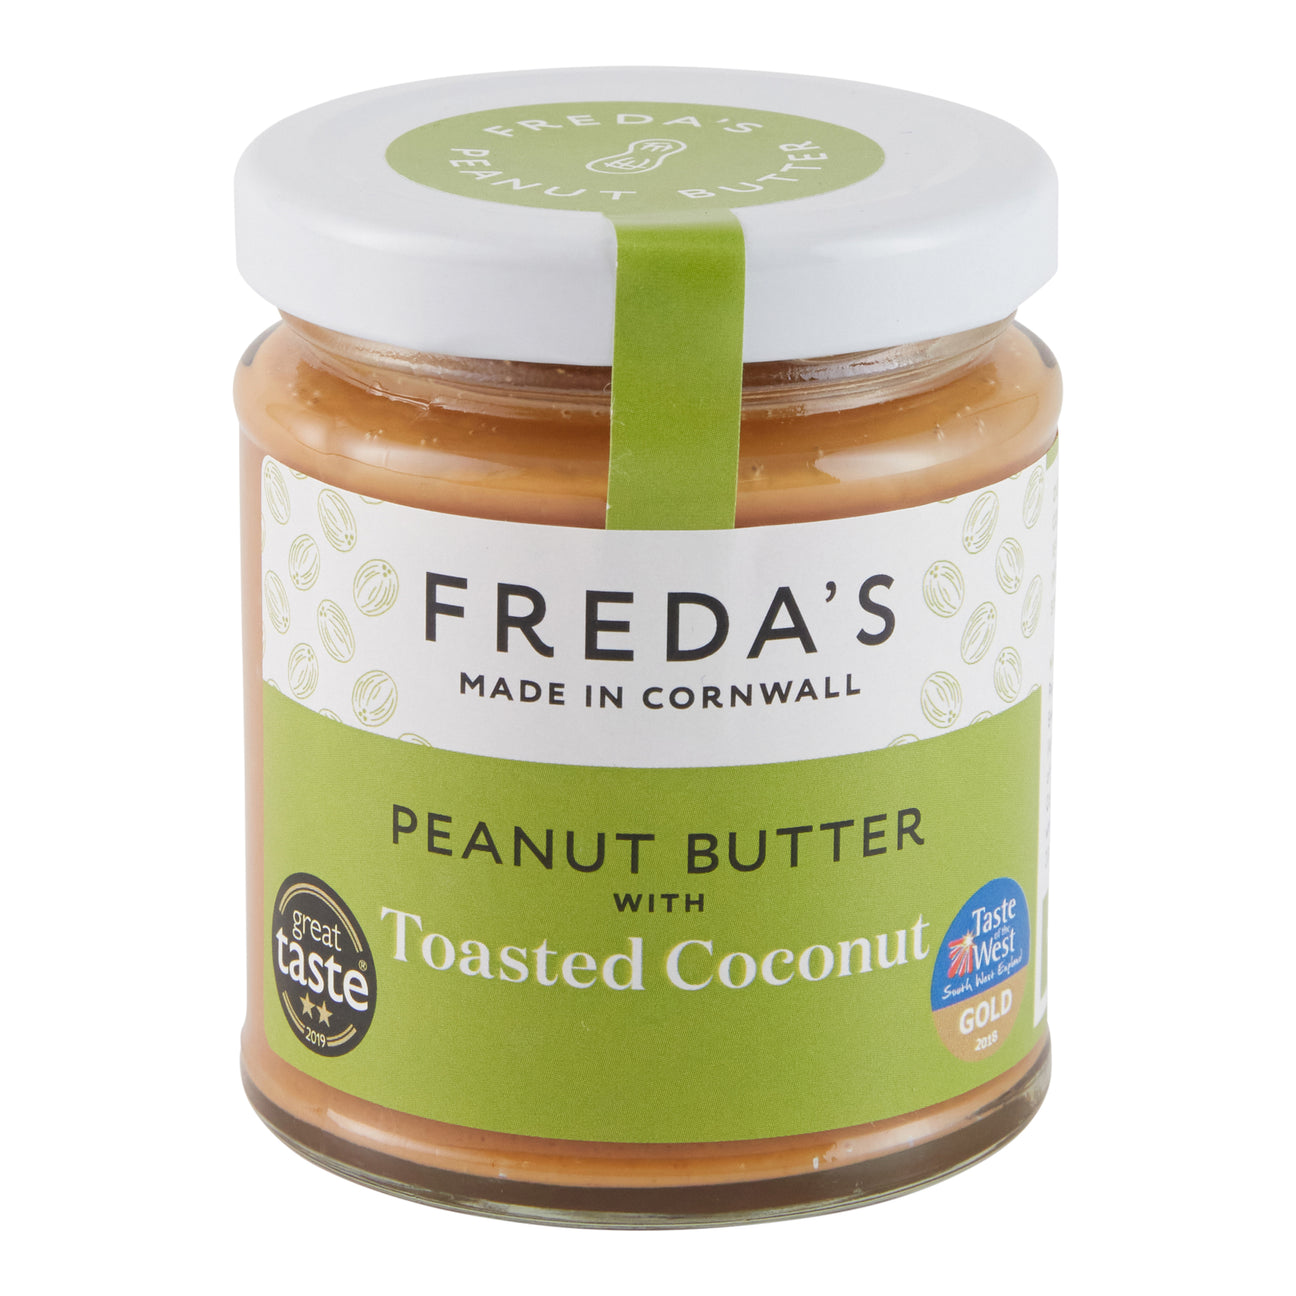 Toasted Coconut Peanut Butter (180g)